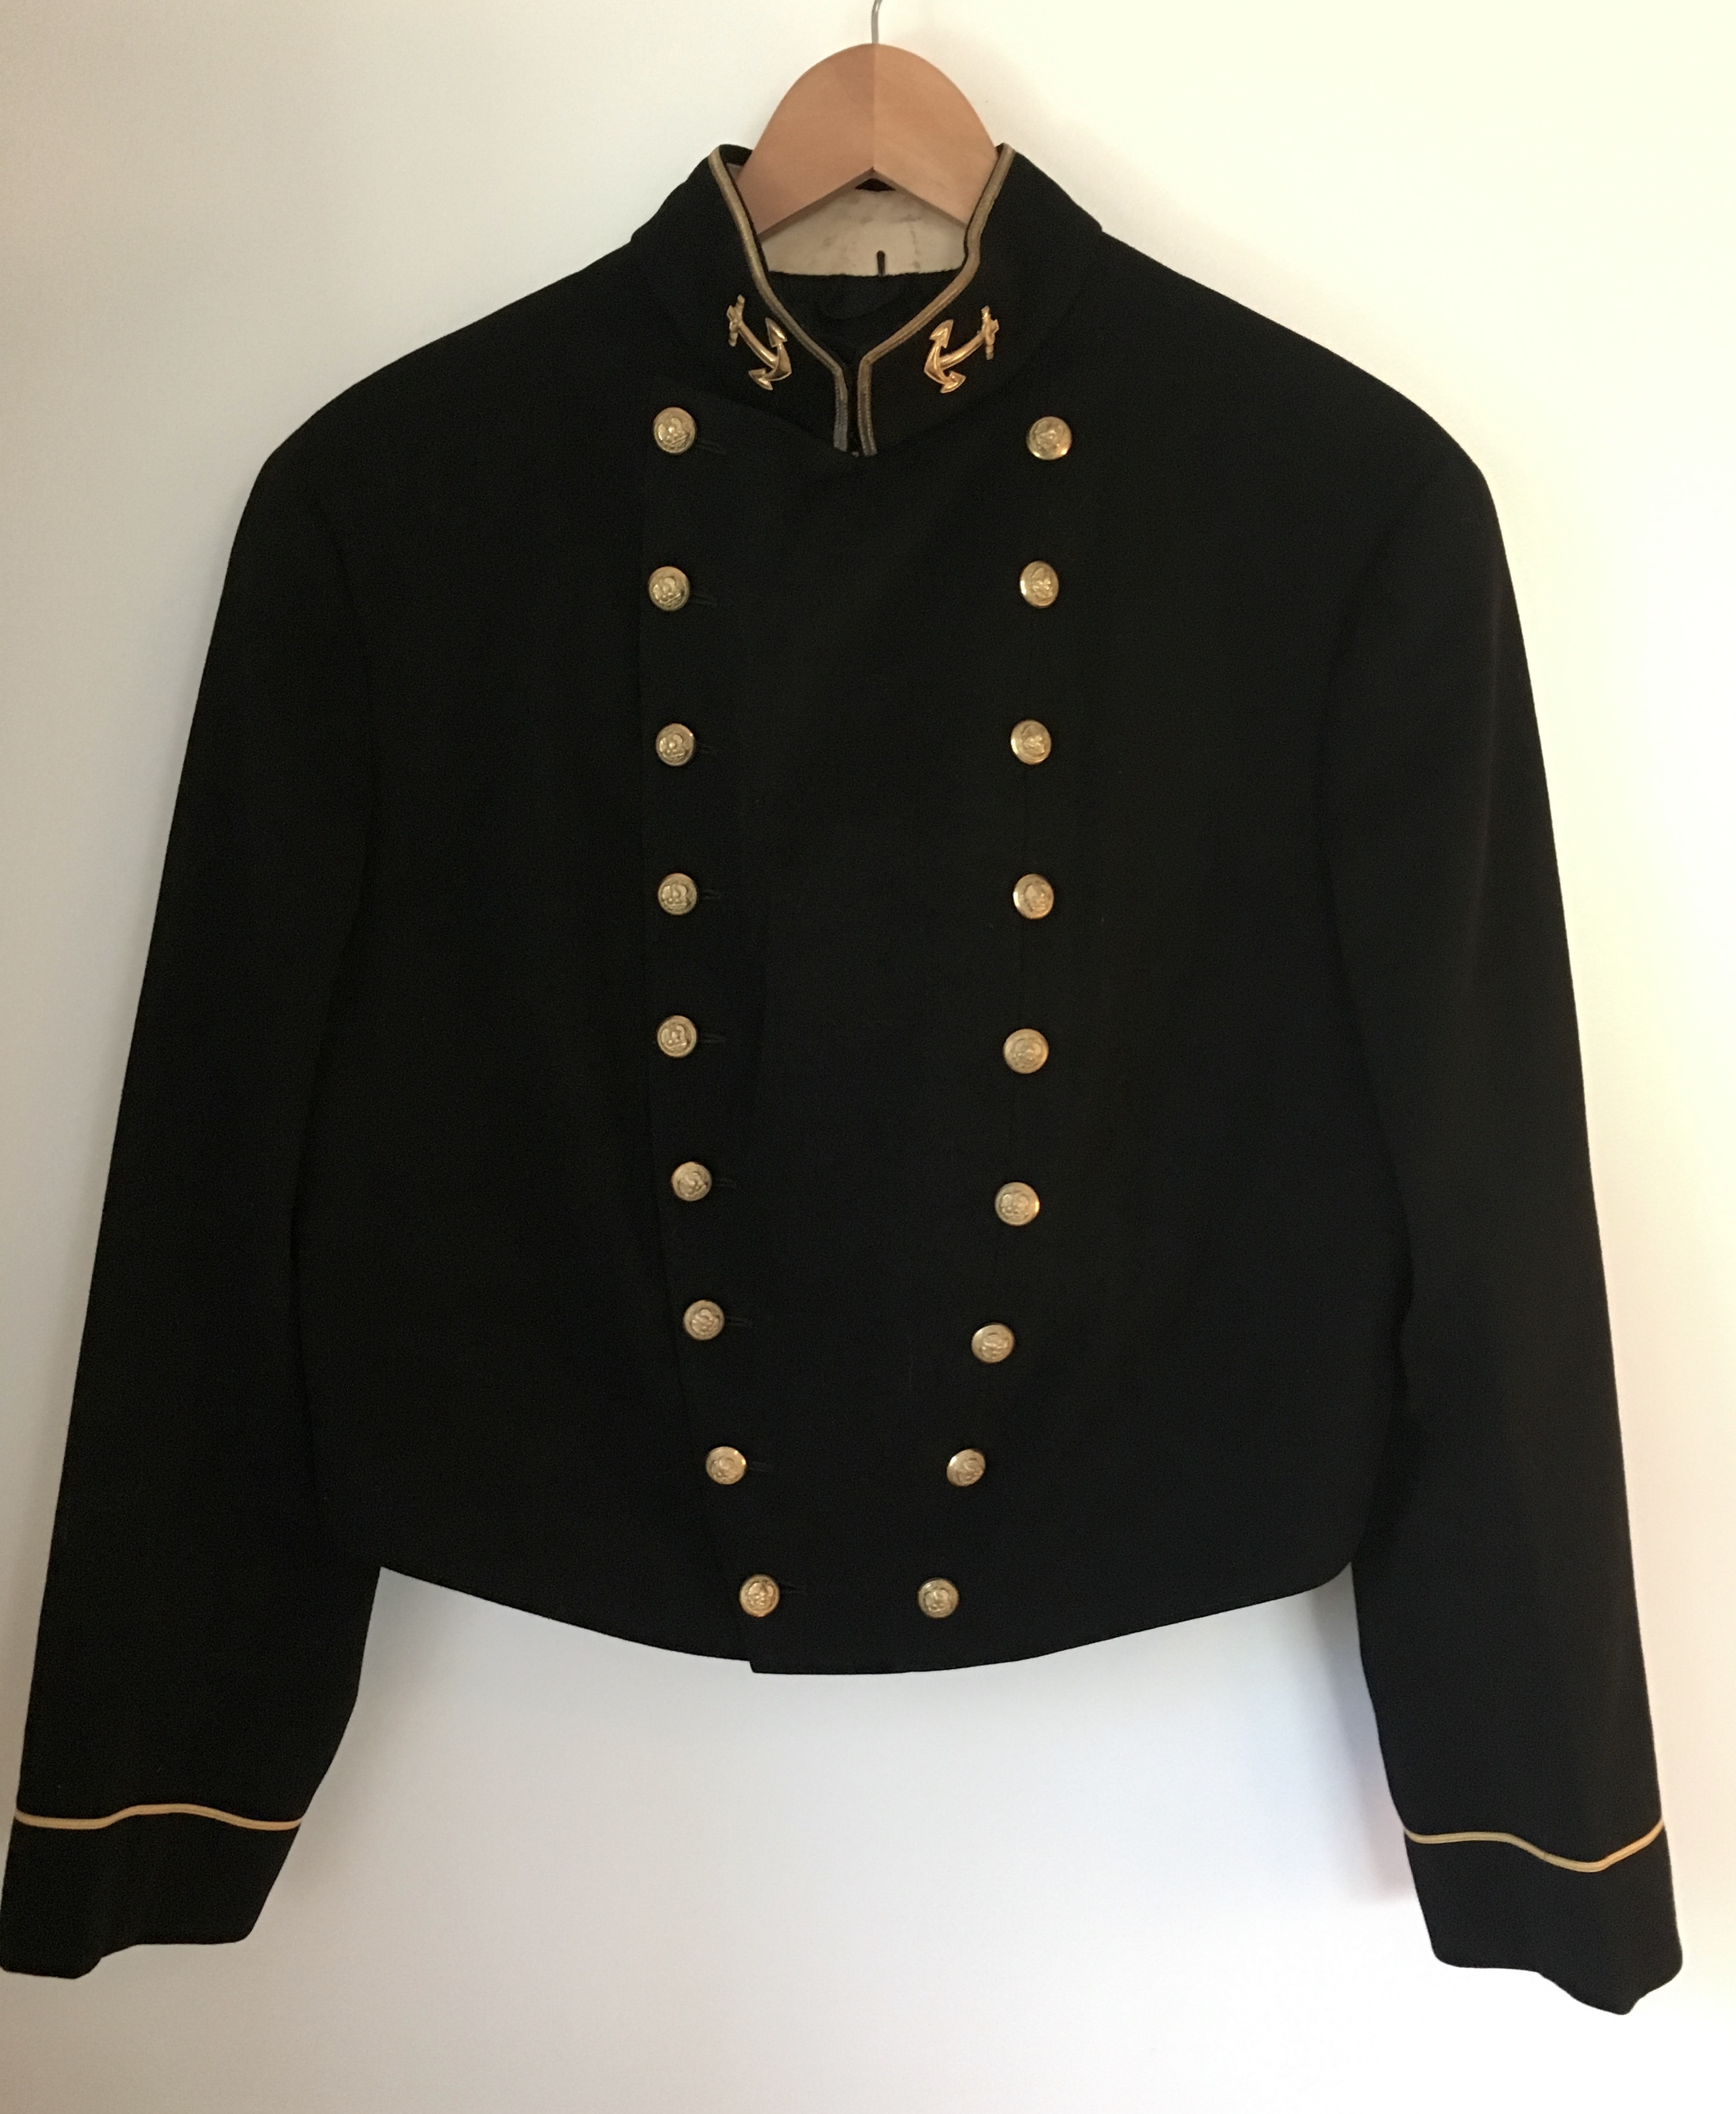 usna dress blues 1940 – a collection of writing